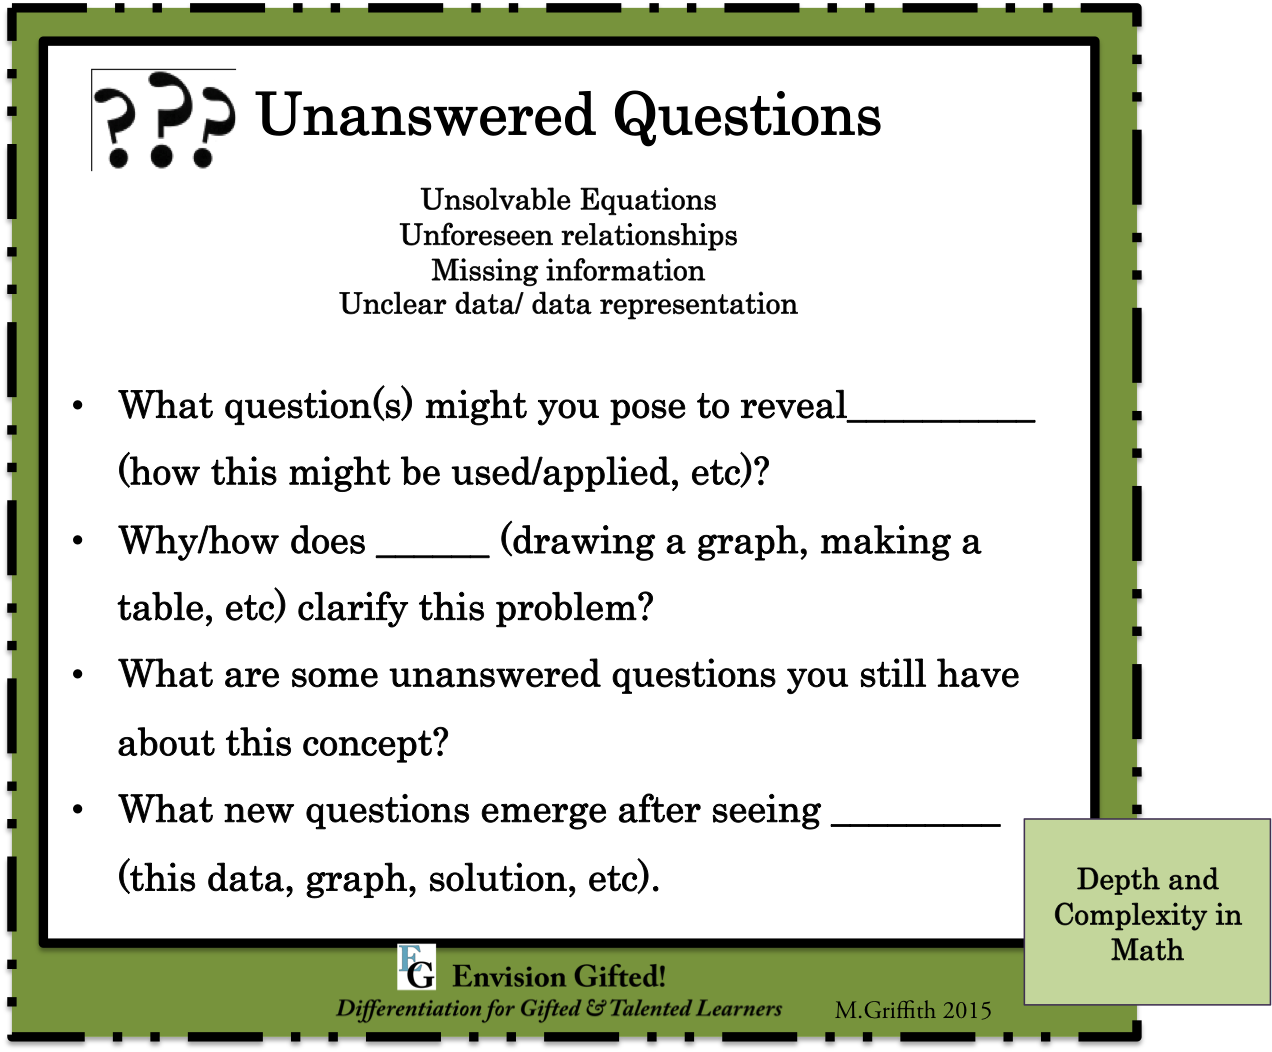 Envision Gifted. Depth and Complexity in Math Unanswered Questions